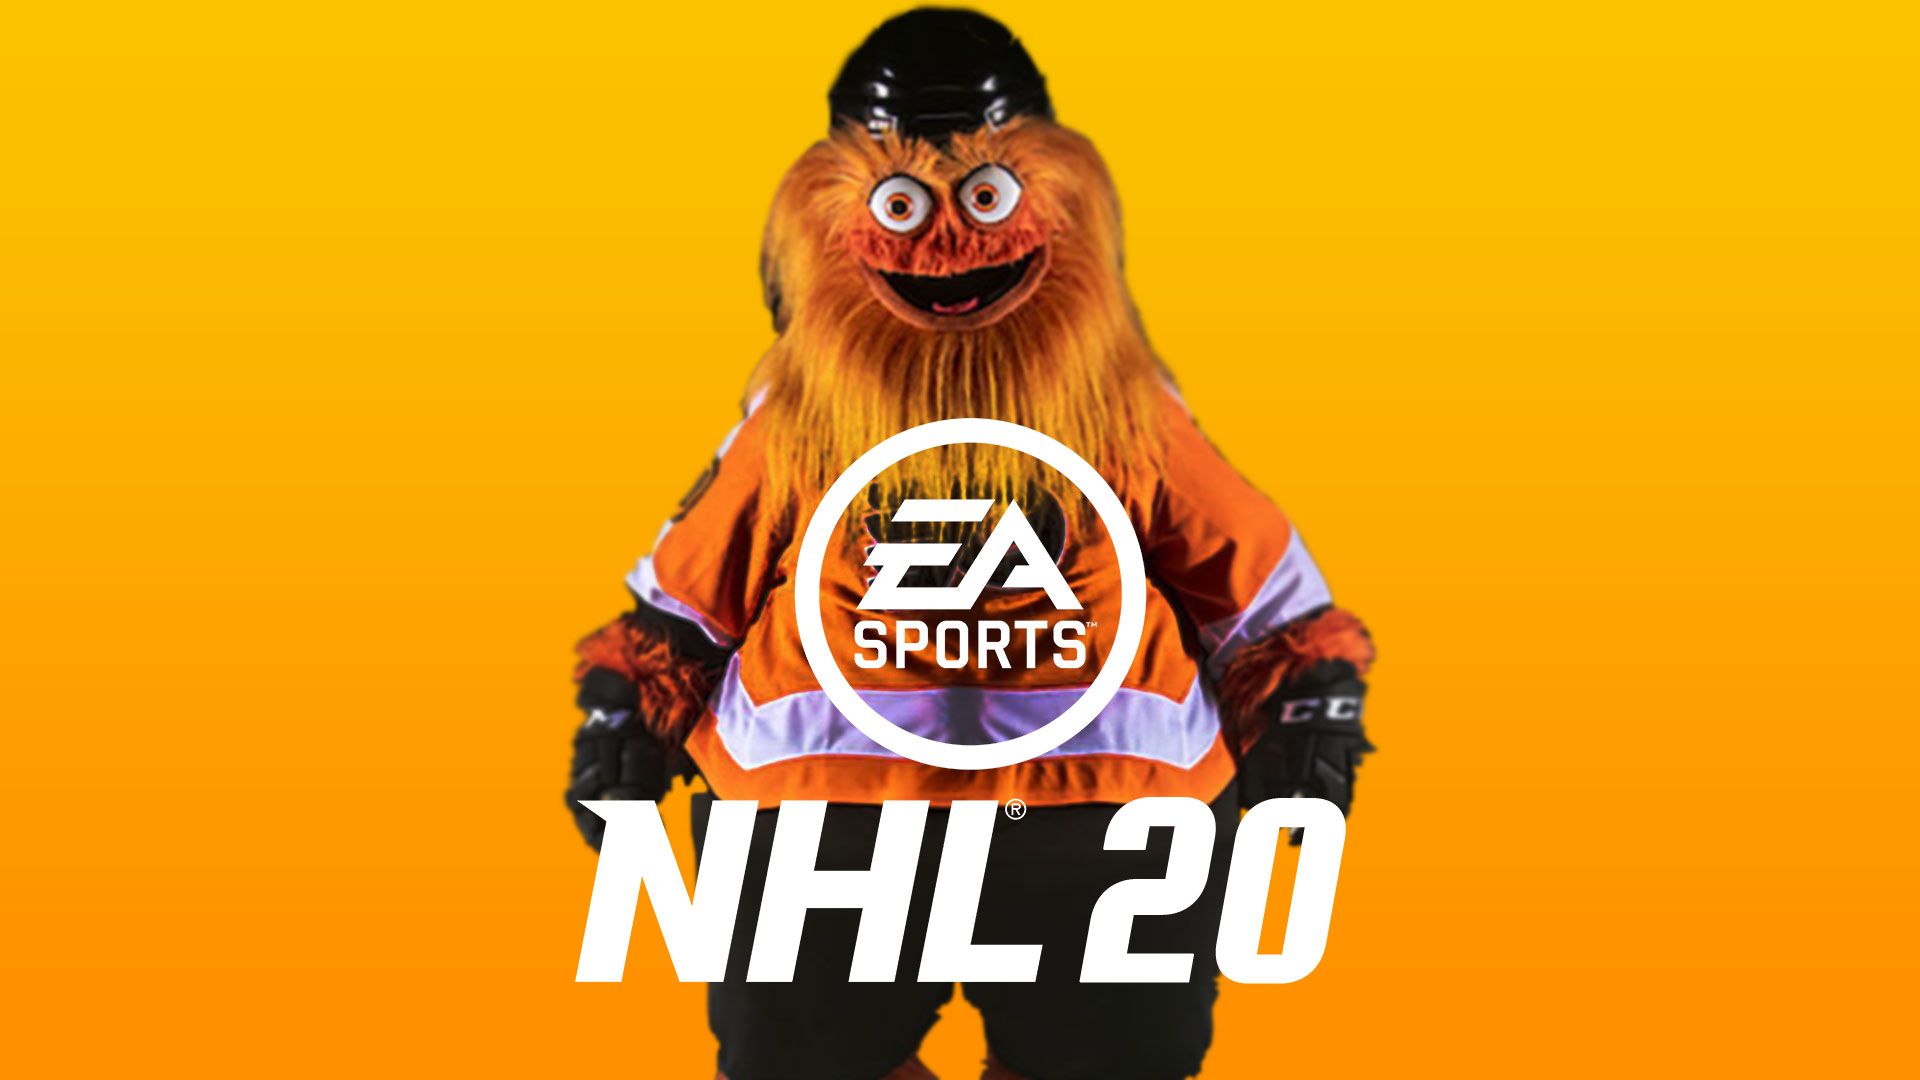 NHL 20 Gritty EA Sports Cover